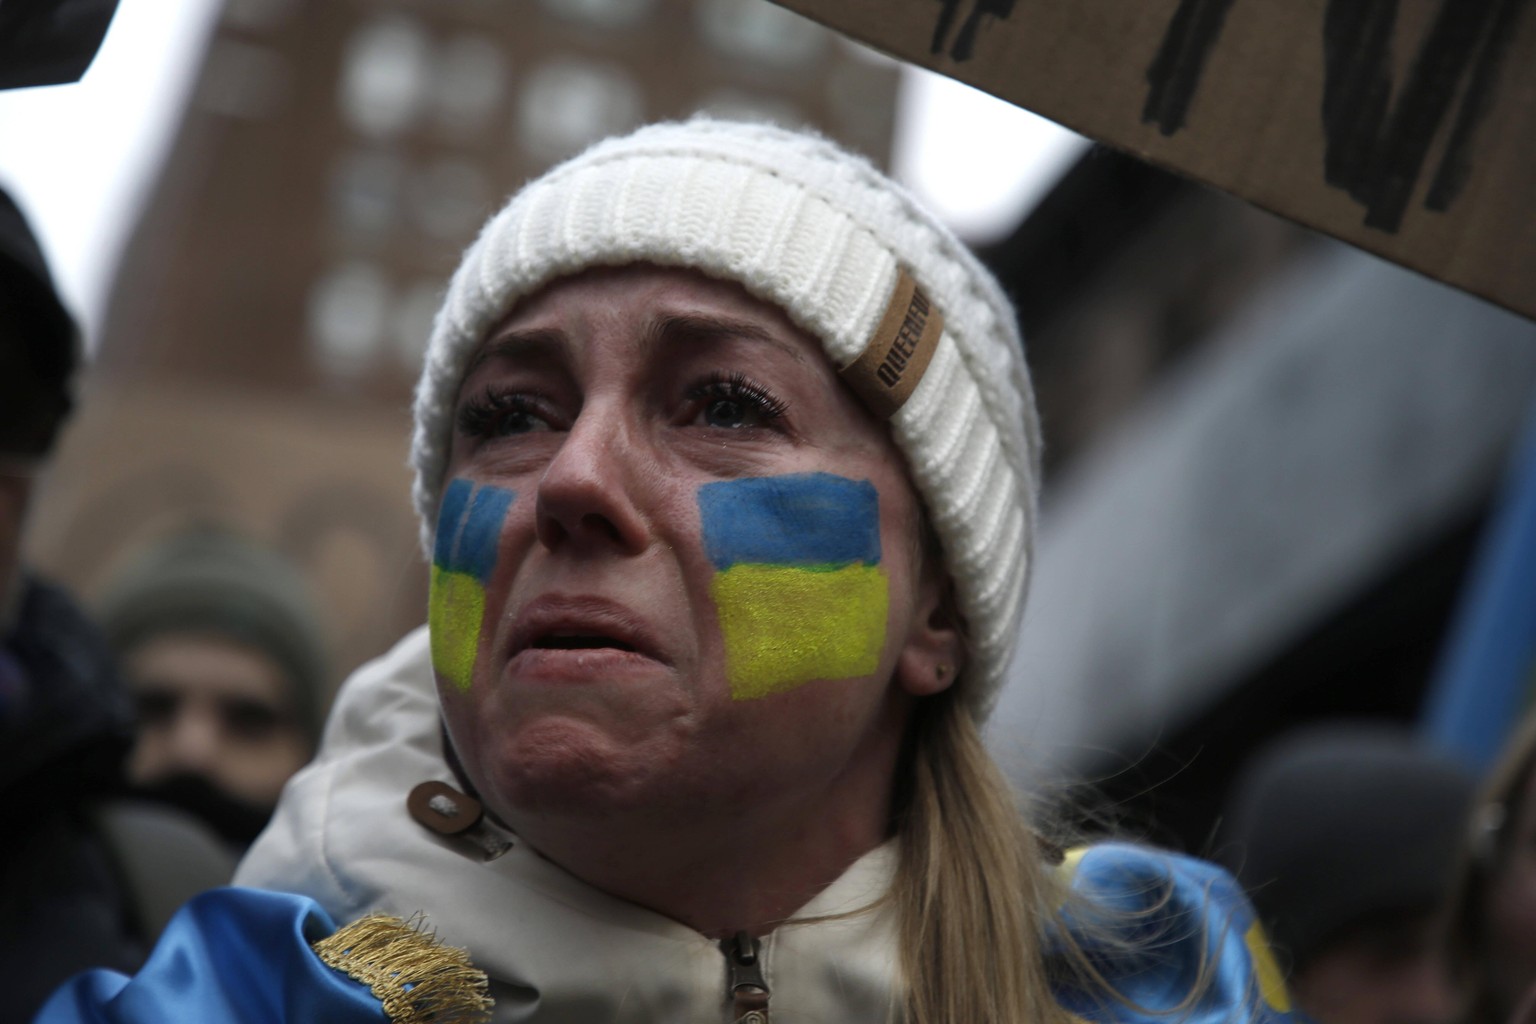 News Bilder des Tages Pro-Ukarine Rally In New York City Supporter of the Ukraine becomes emoional near the Russian Mission on the Upper East Side of Manhattan during the Stand With Ukraine Rally befo ...